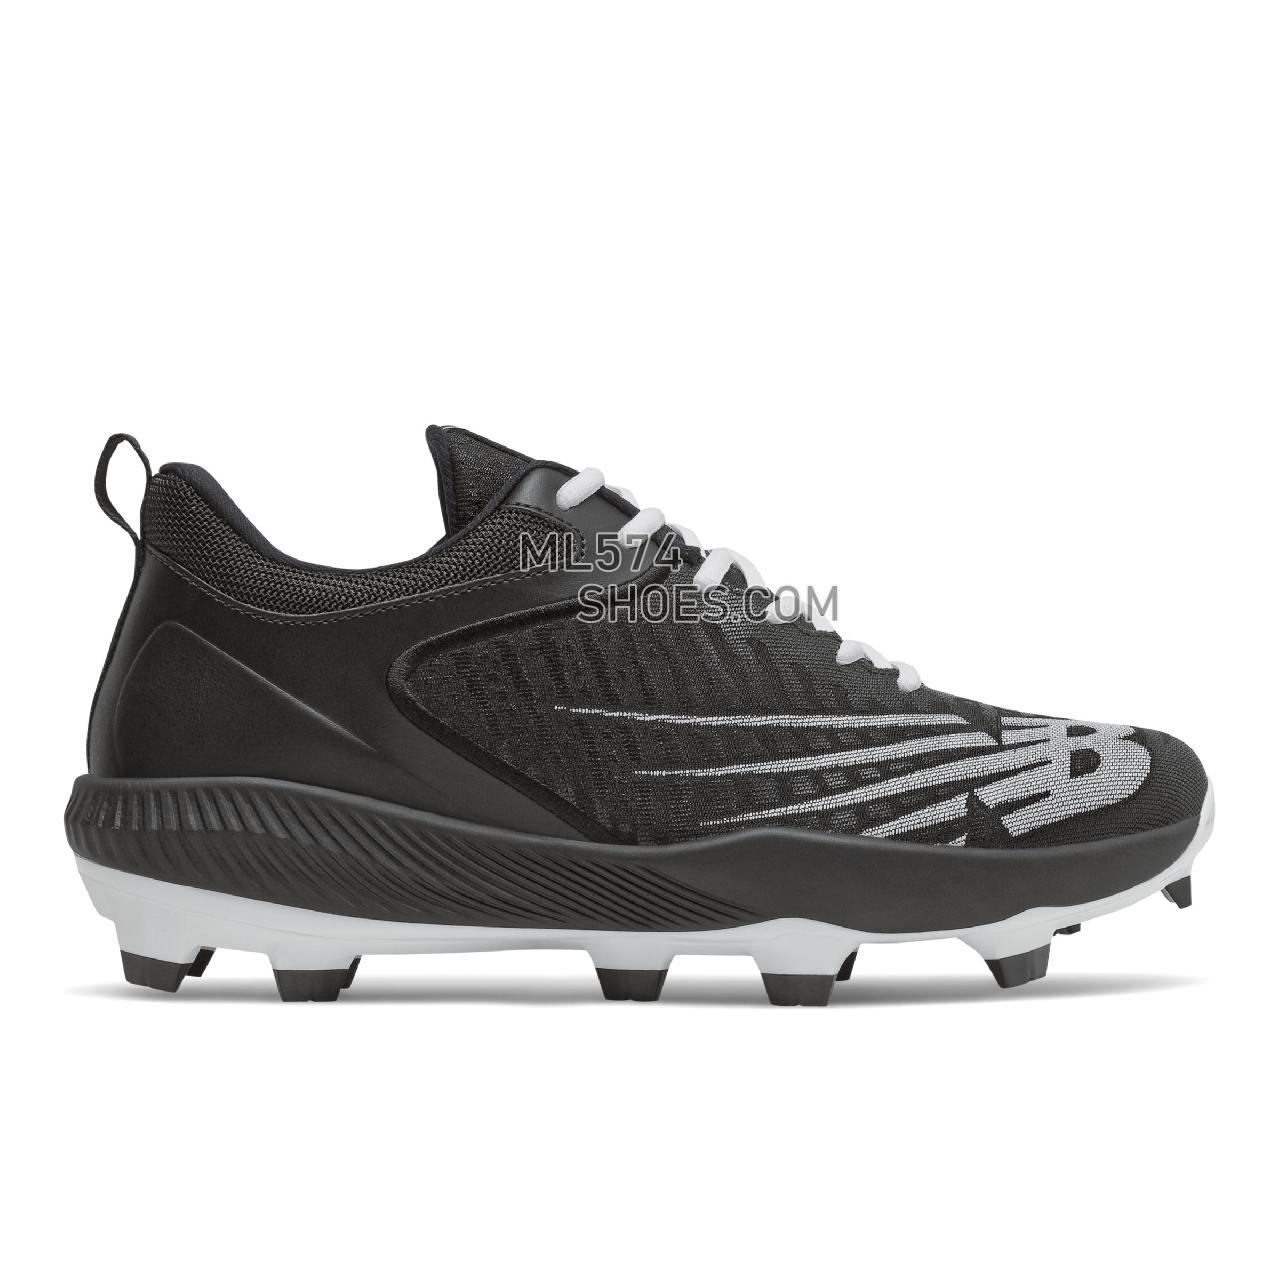 New Balance FuelCell 4040 v6 Molded - Men's Mid-Cut Baseball Cleats - Black with White - PL4040K6